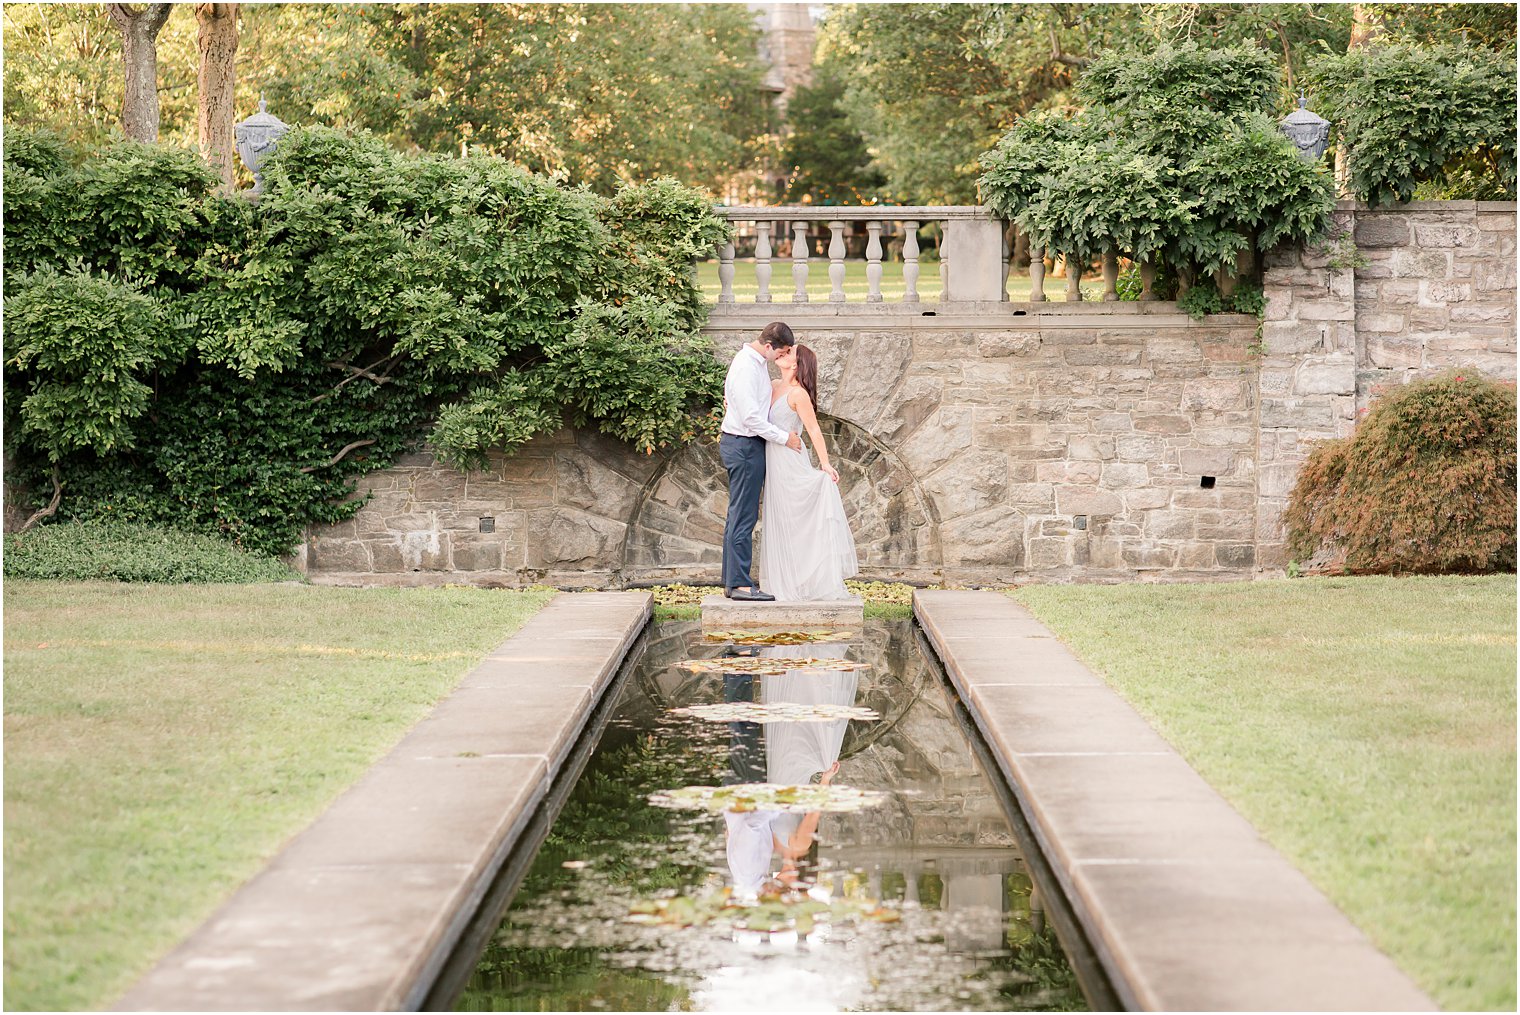 Idalia Photography captures classic engagement session by pond at Skylands Manor